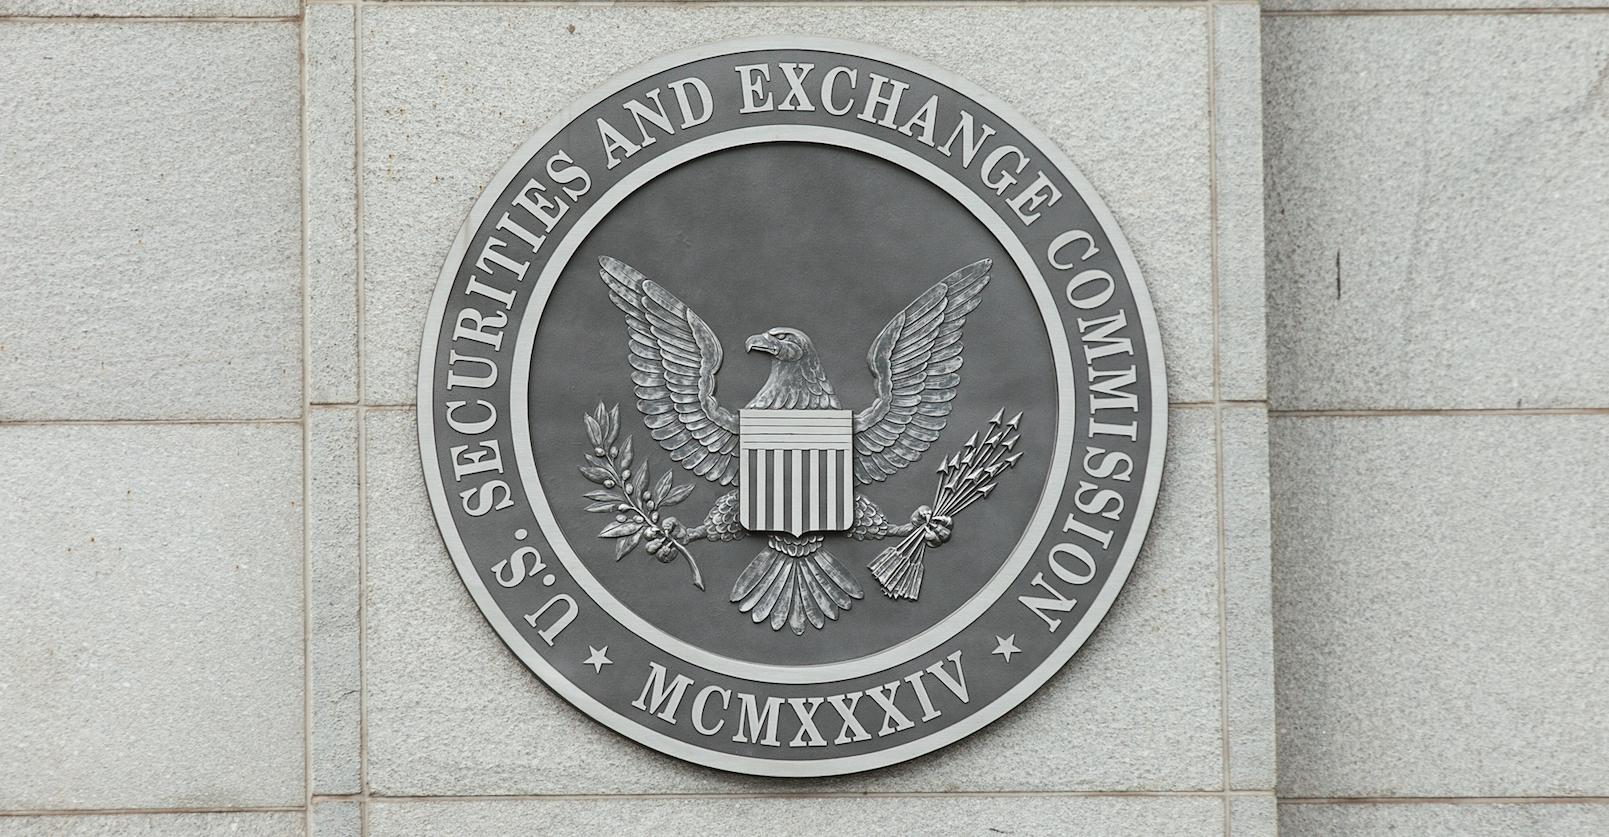 SEC hates free markets .. Protecting people with regulation...